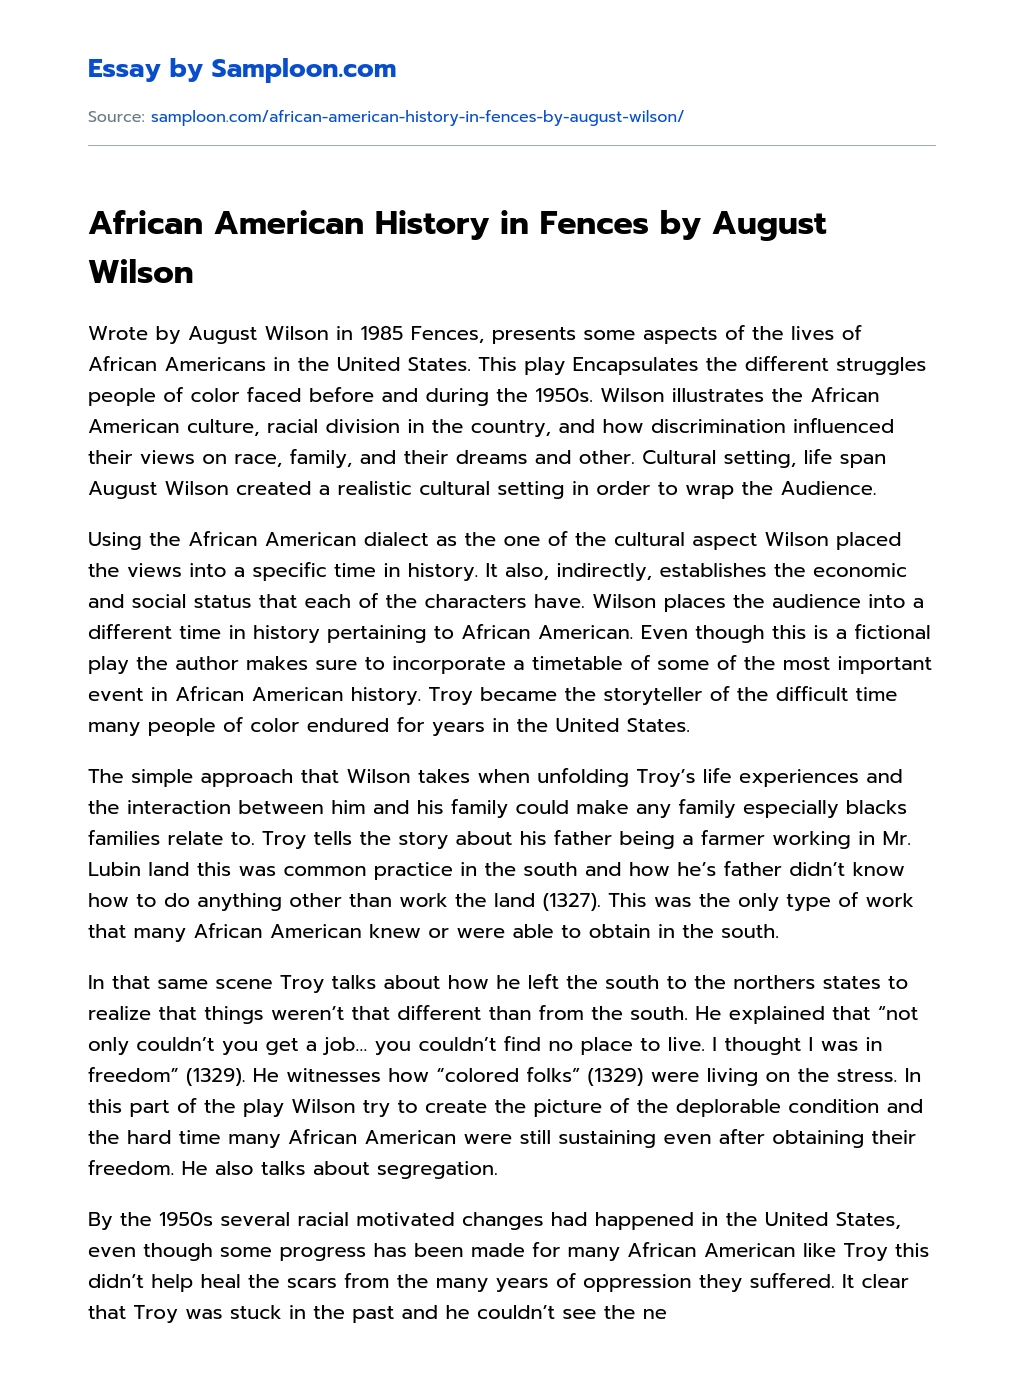 African American History in Fences by August Wilson essay